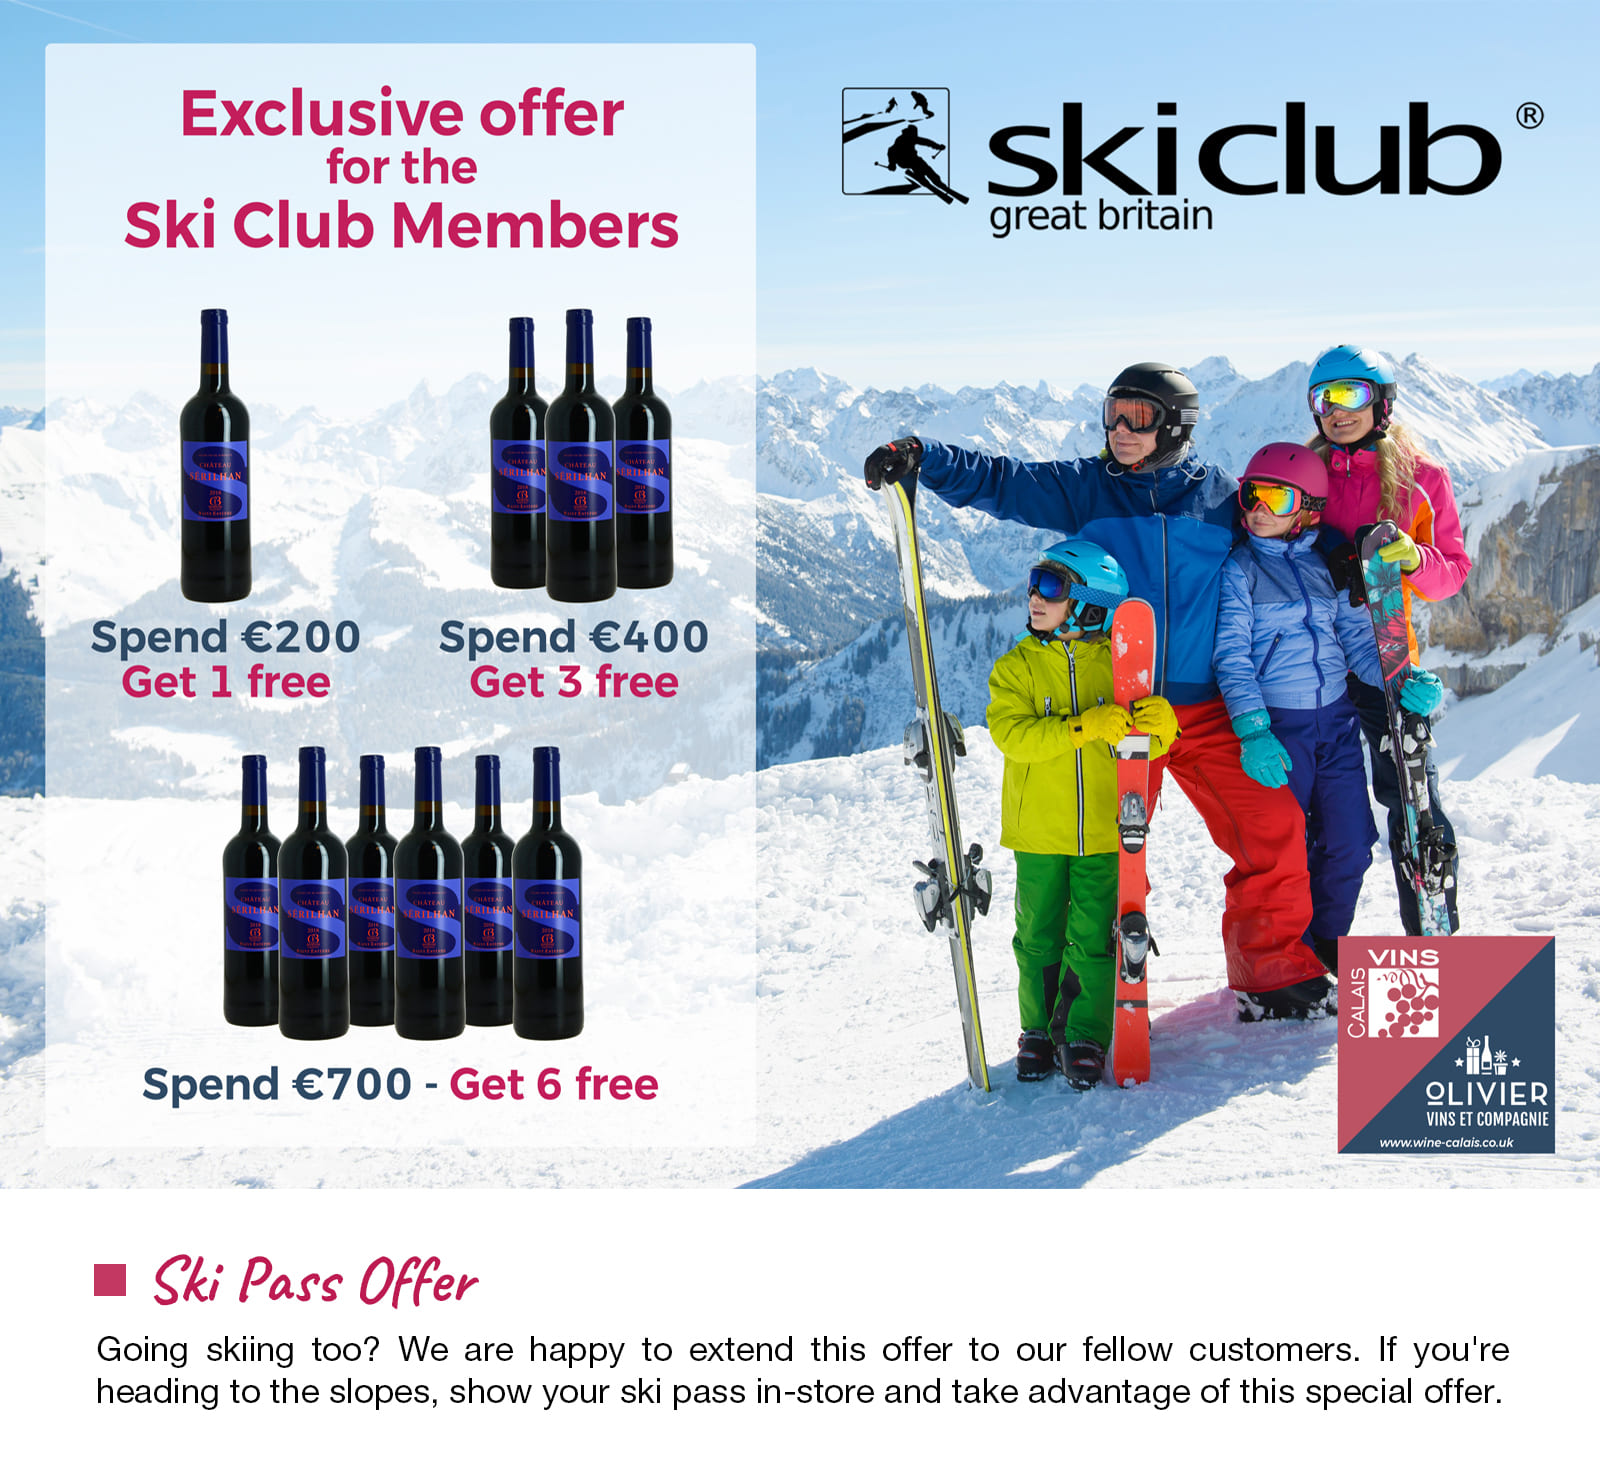 special offer for skiers, more savings